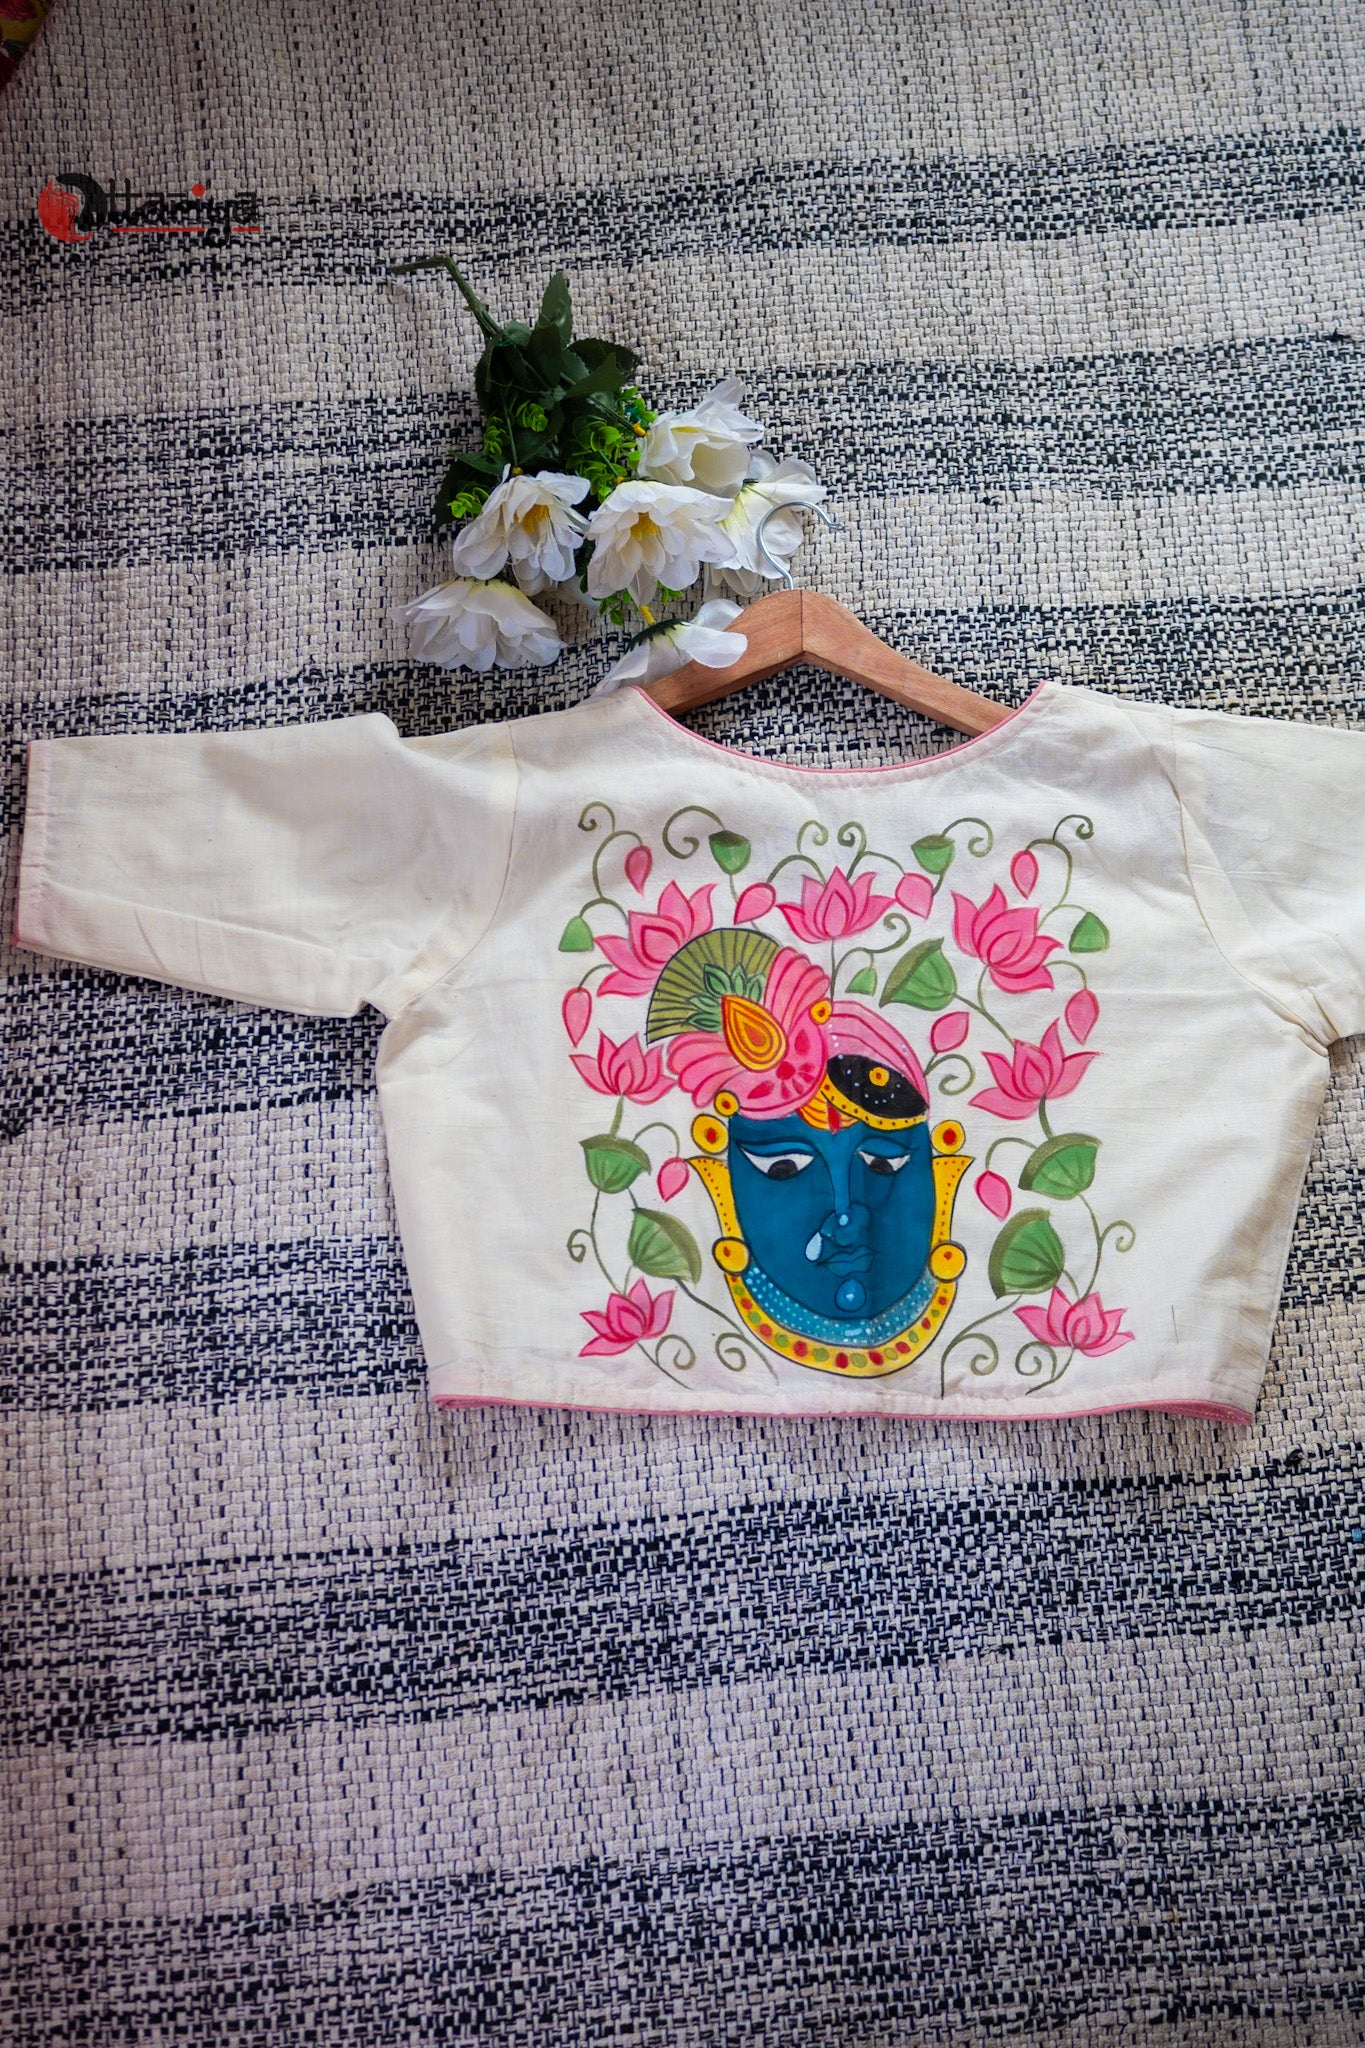 Madhura’s hand painted blouse